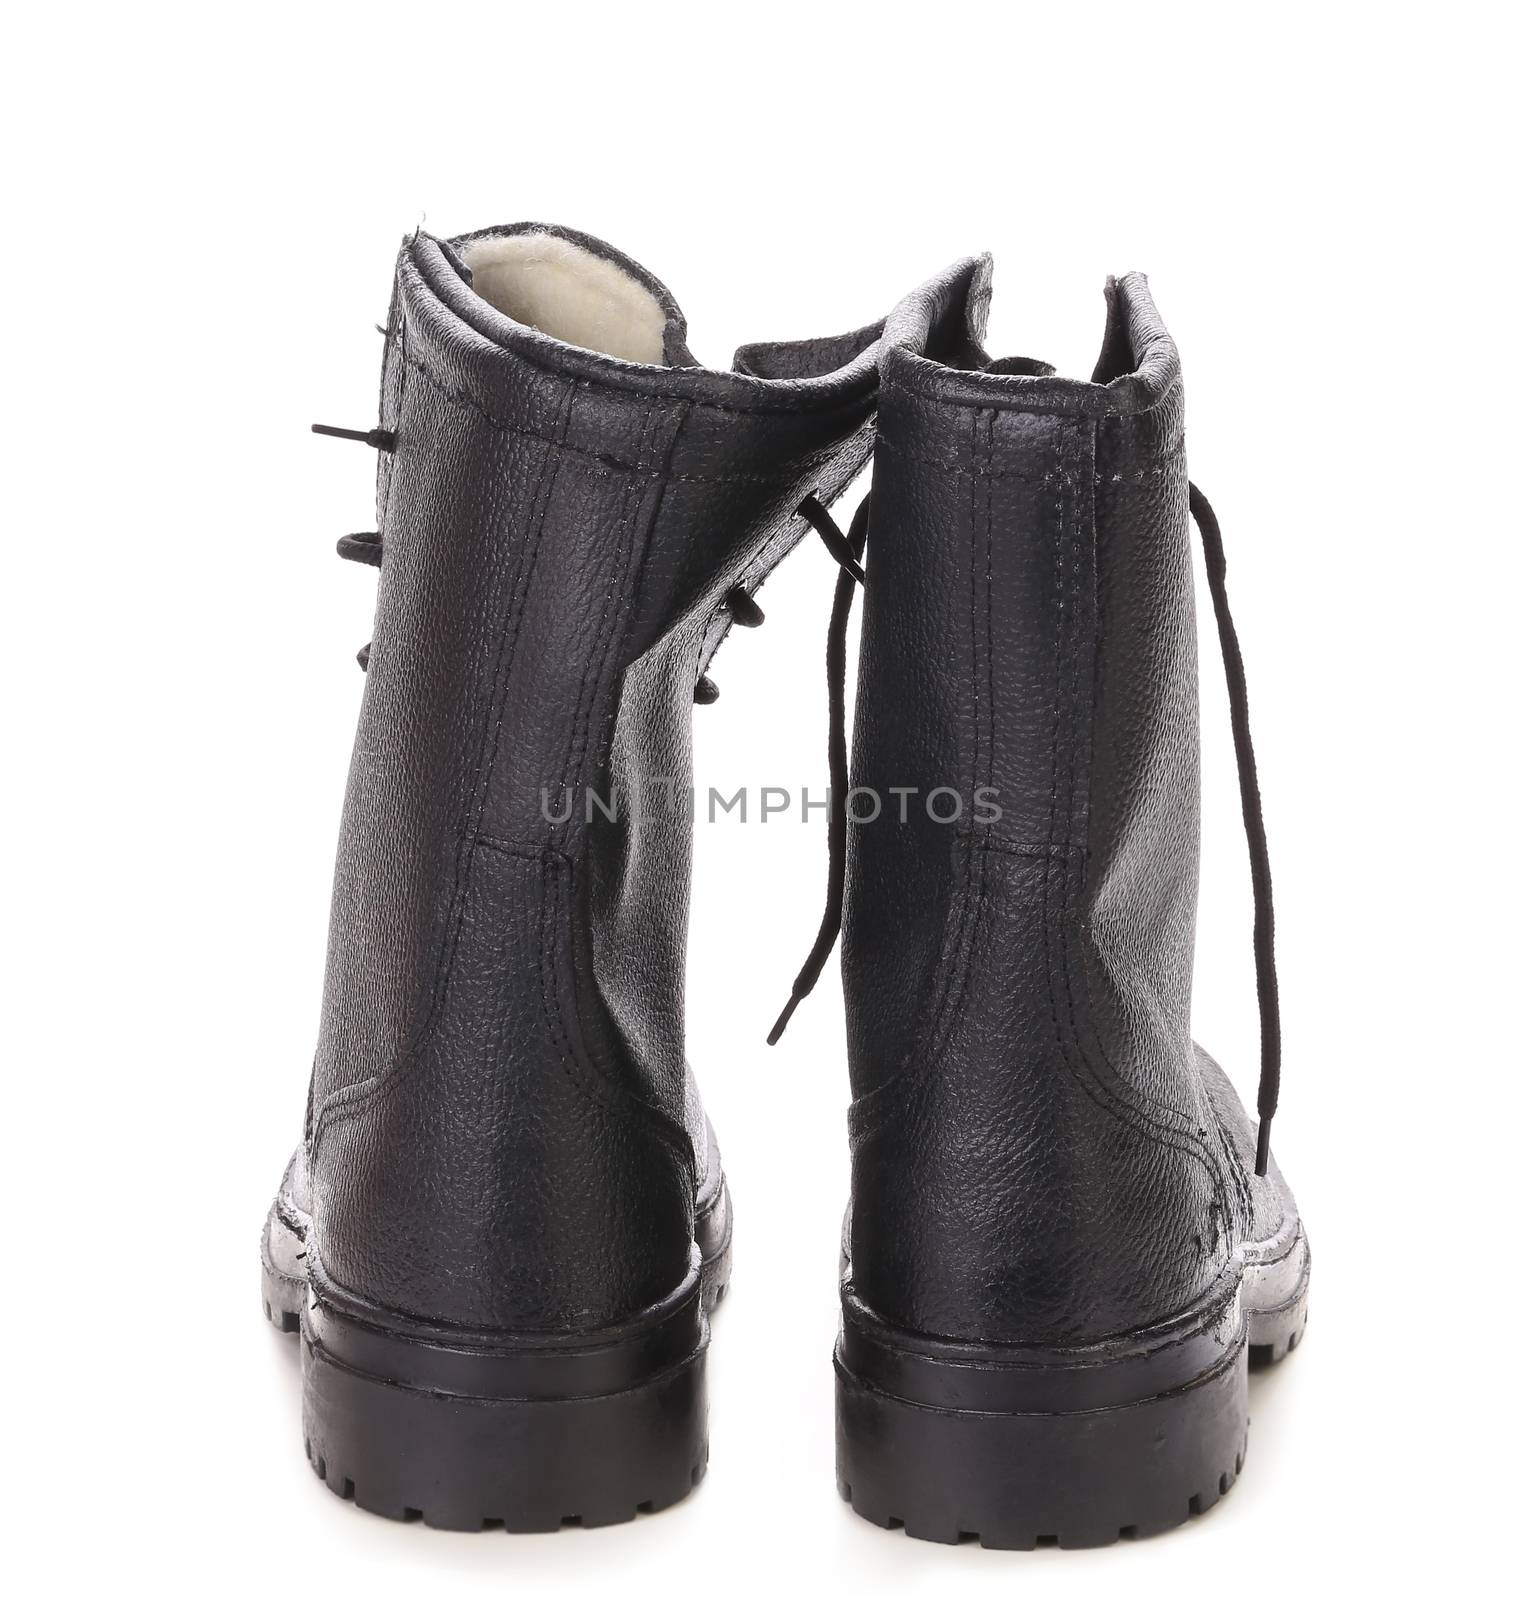 Leather man's boots. Isolated on a white background.